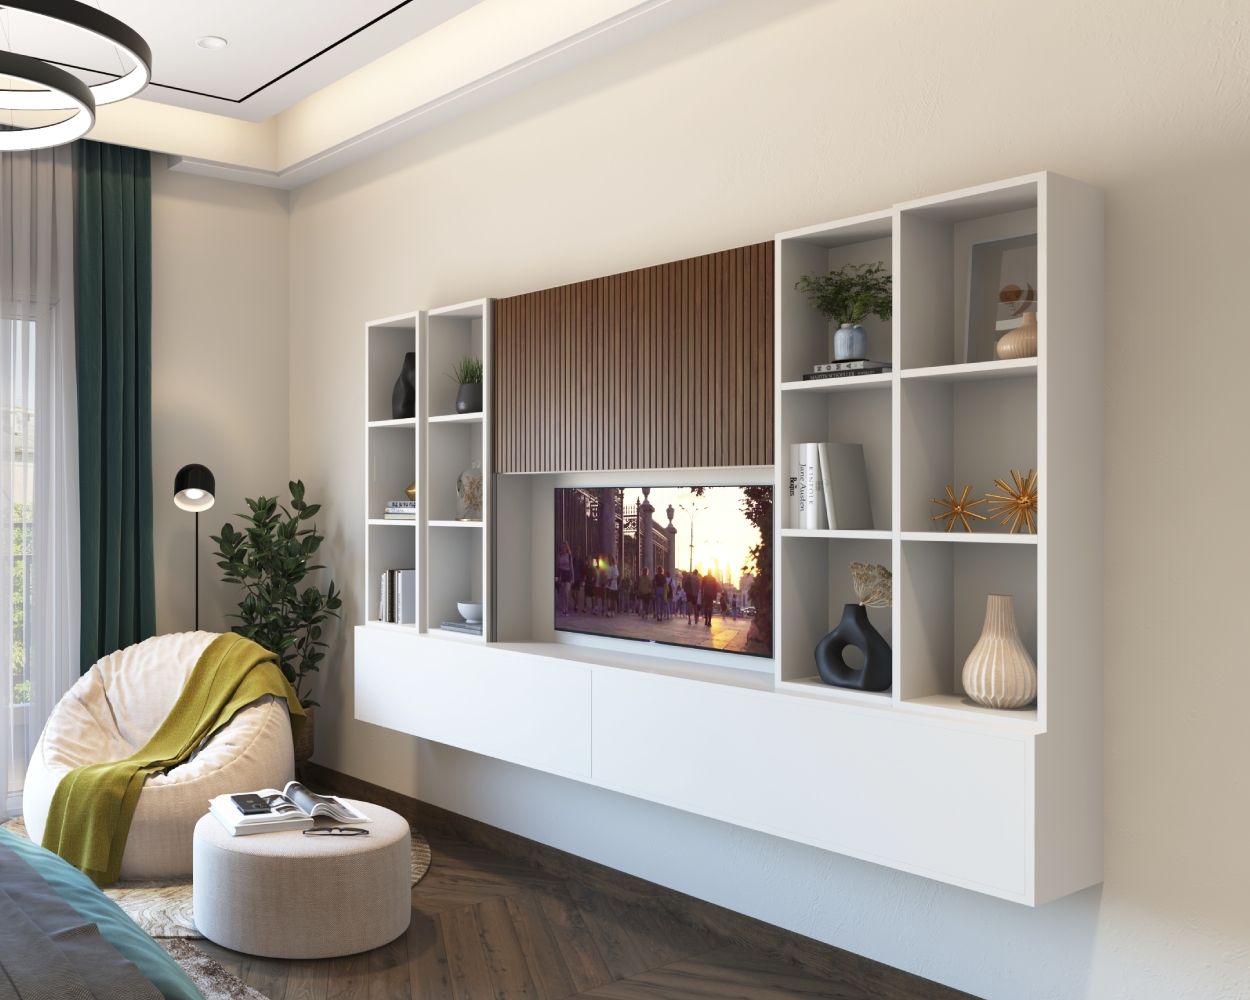 Modern Frosty White TV Unit Design With Wooden Panel And Grooves